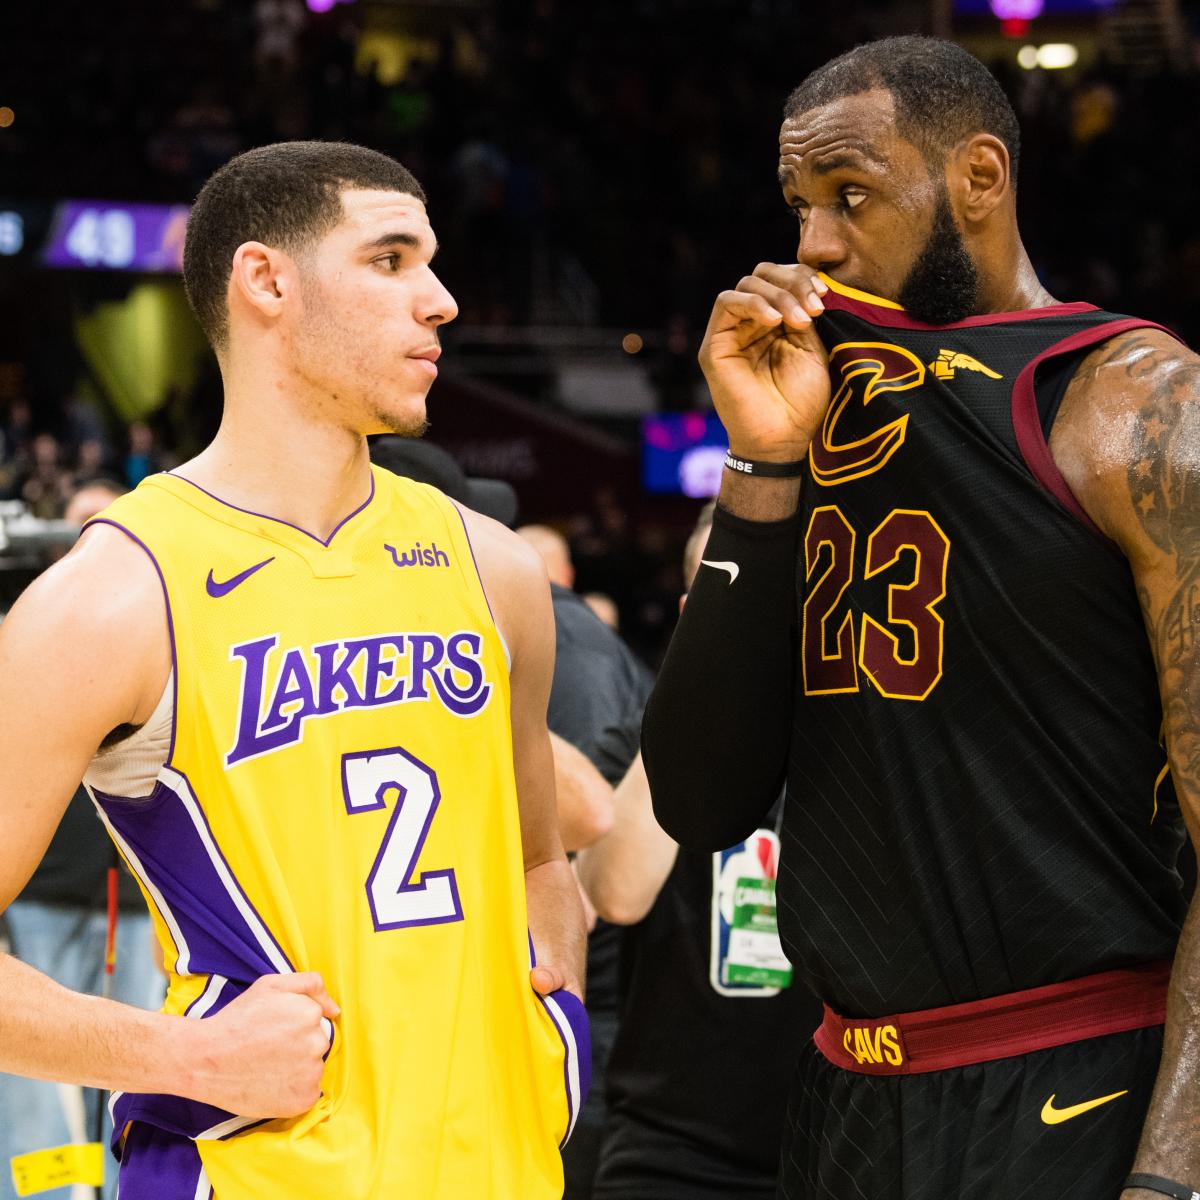 Cody Bellinger is happy to let Lonzo Ball have the LA sports